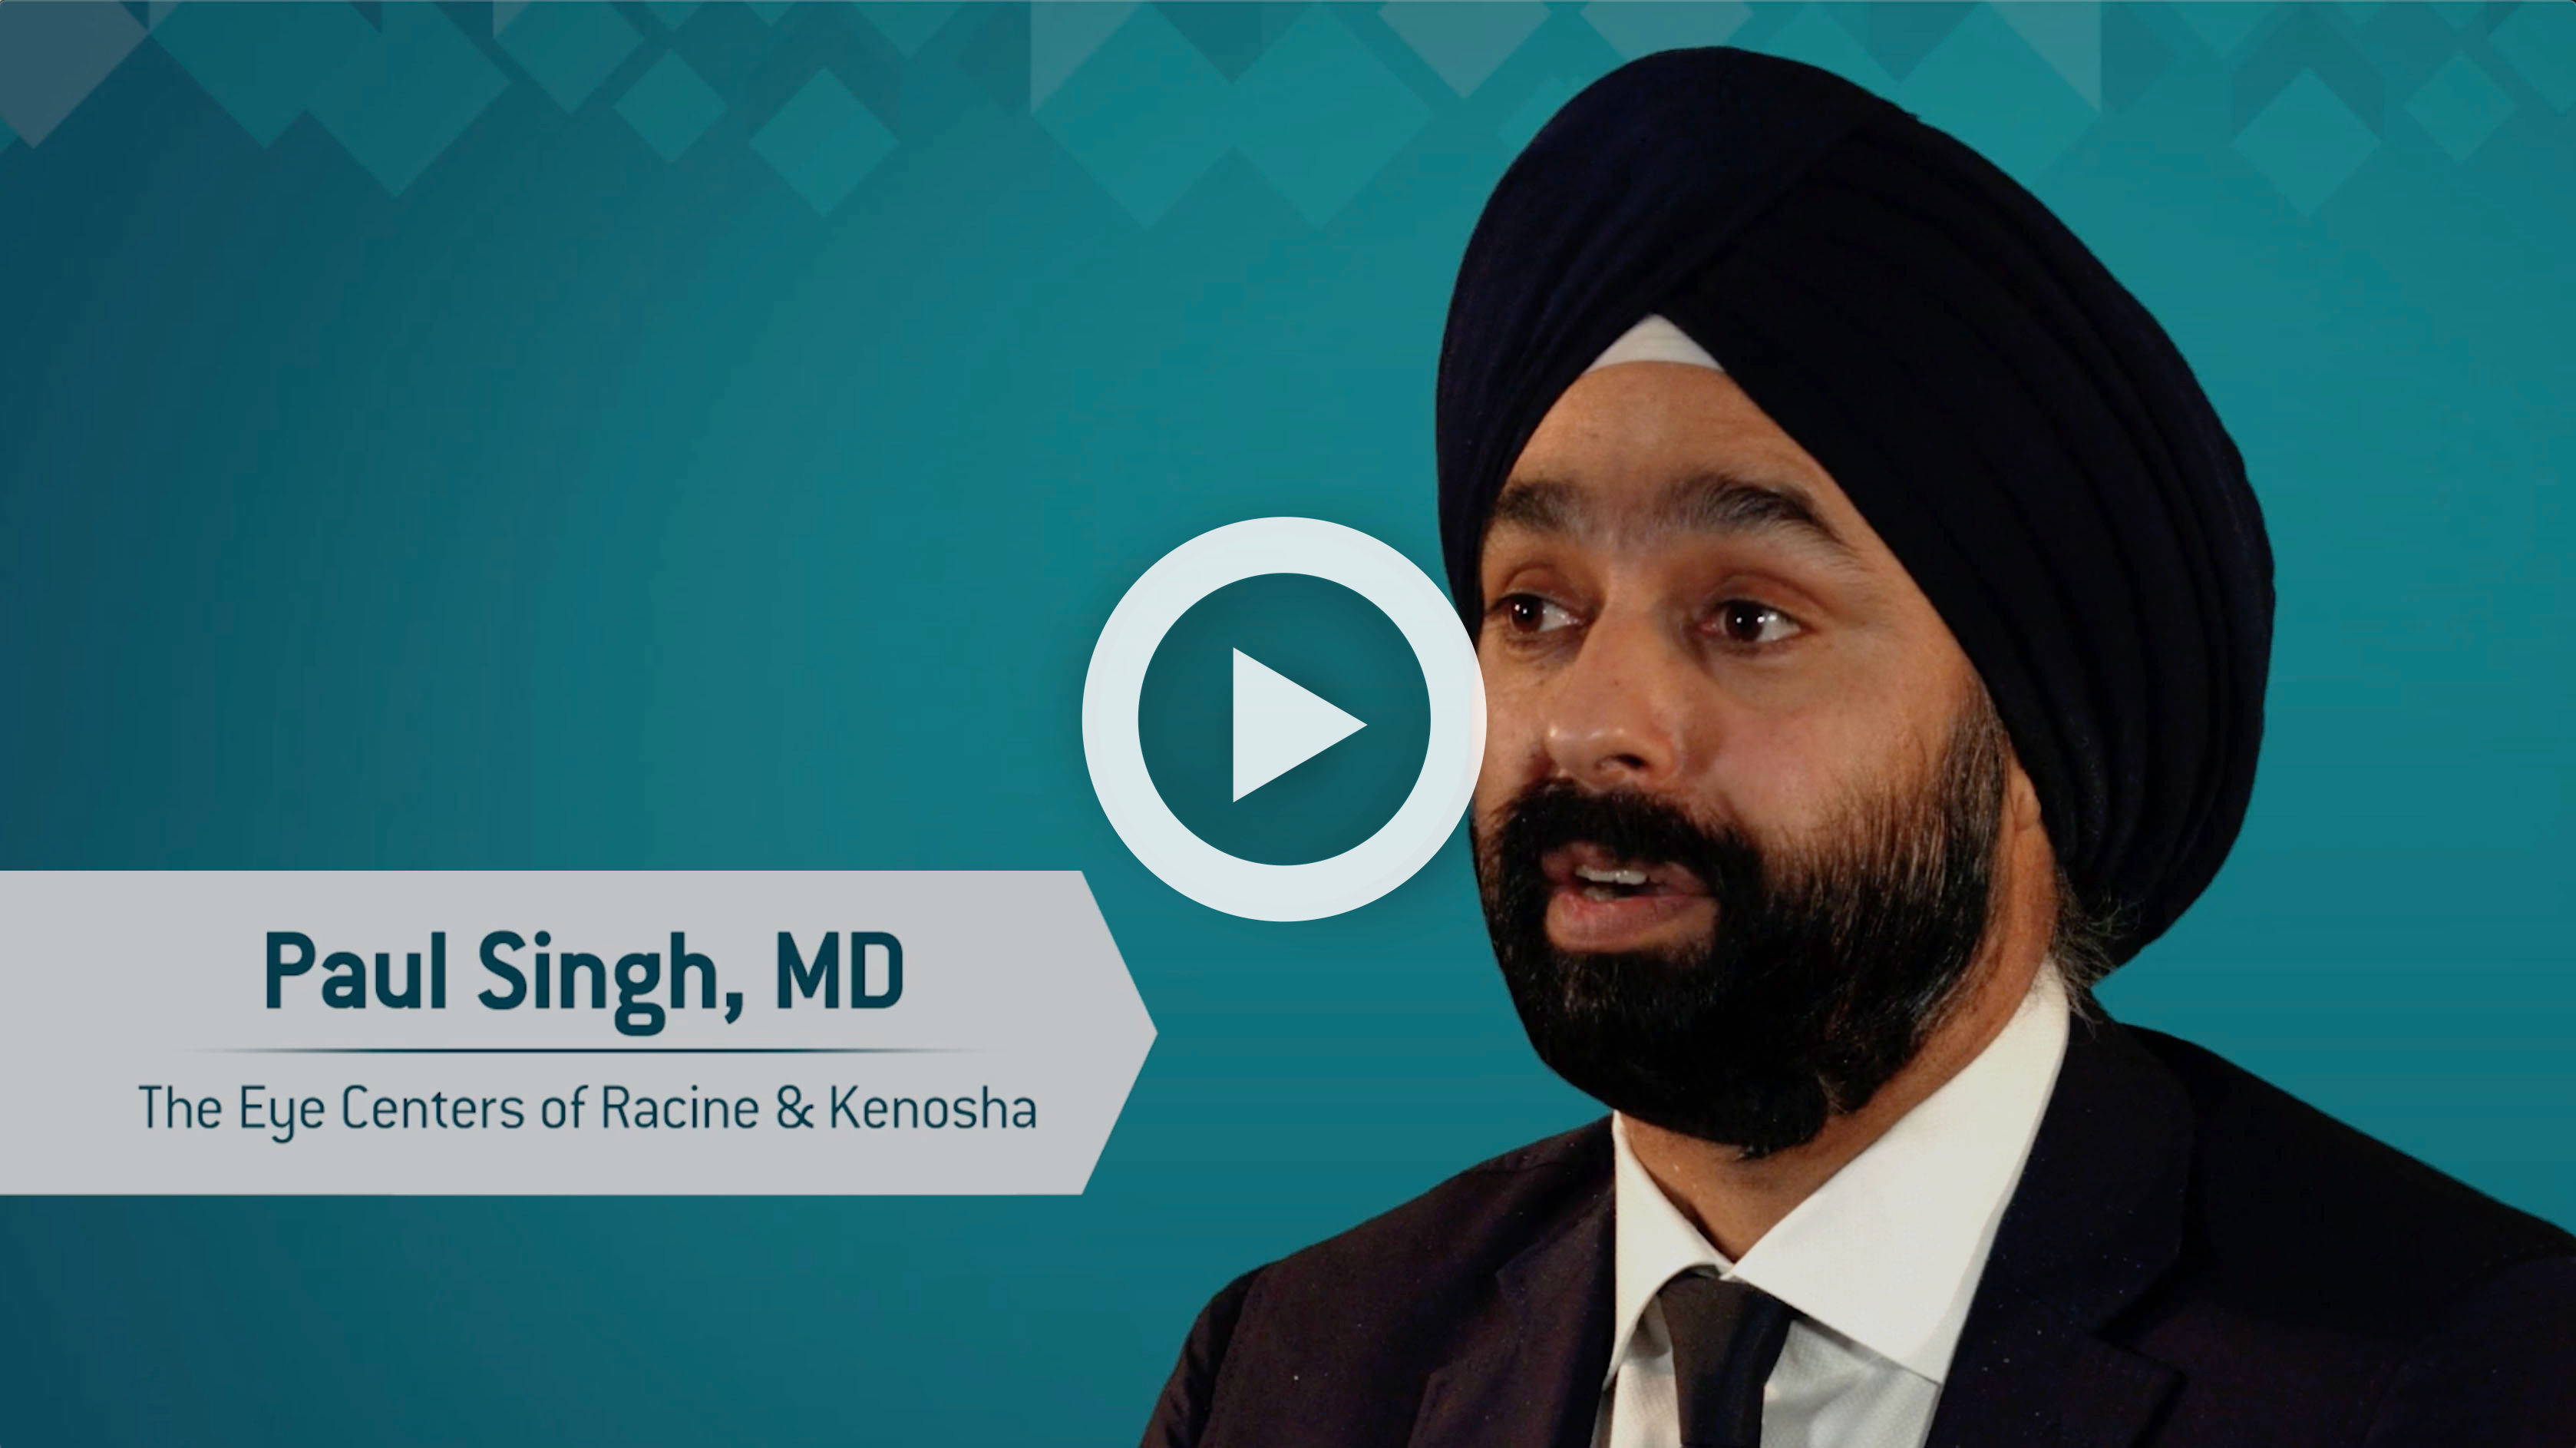 Combined MIGS & Cataract Surgery Case Study with Dr. Paul Singh